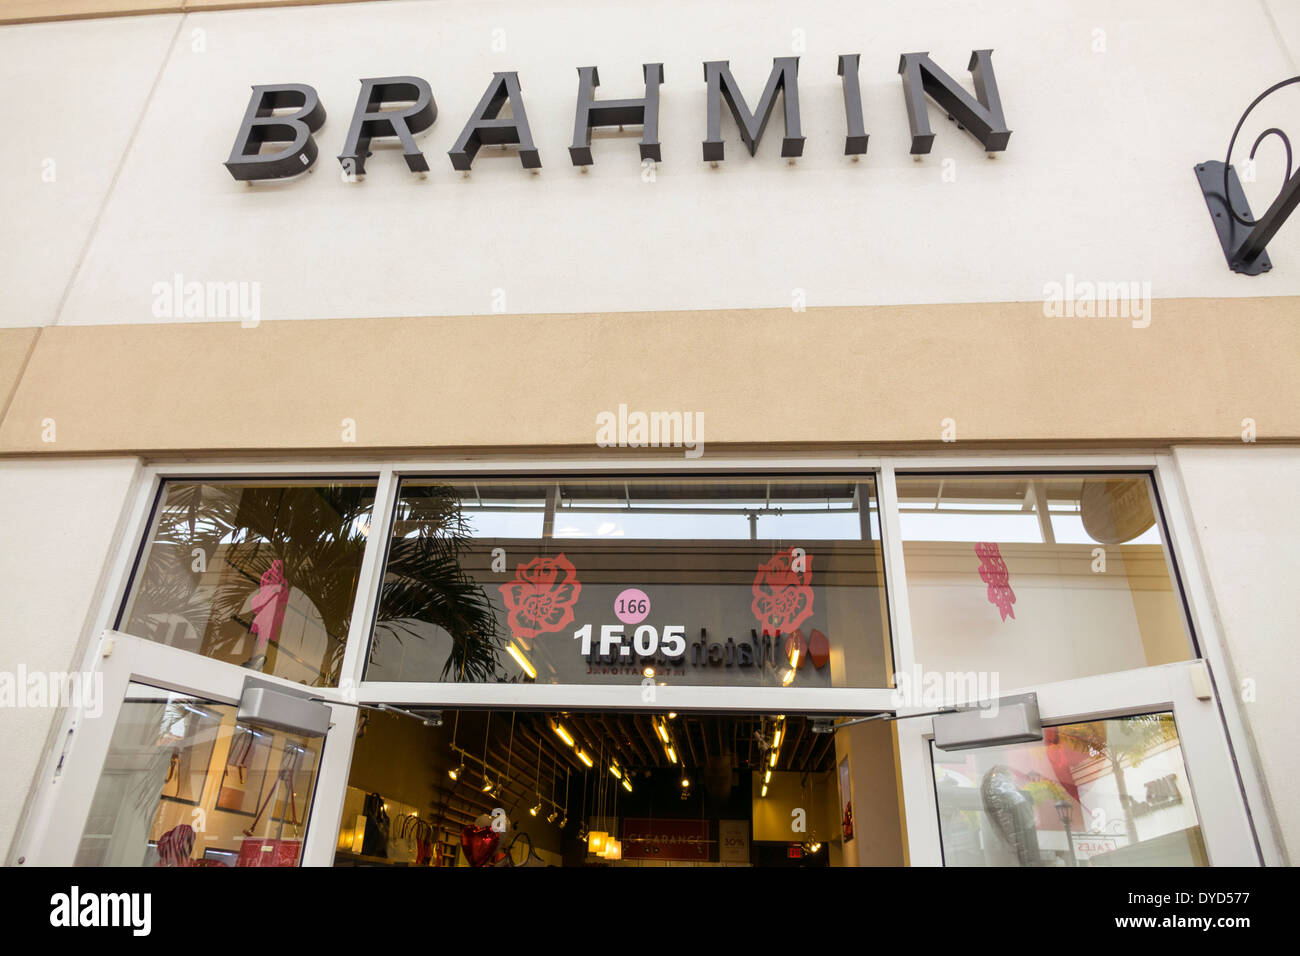 Brahmin Handbags in a Department Store Editorial Photography